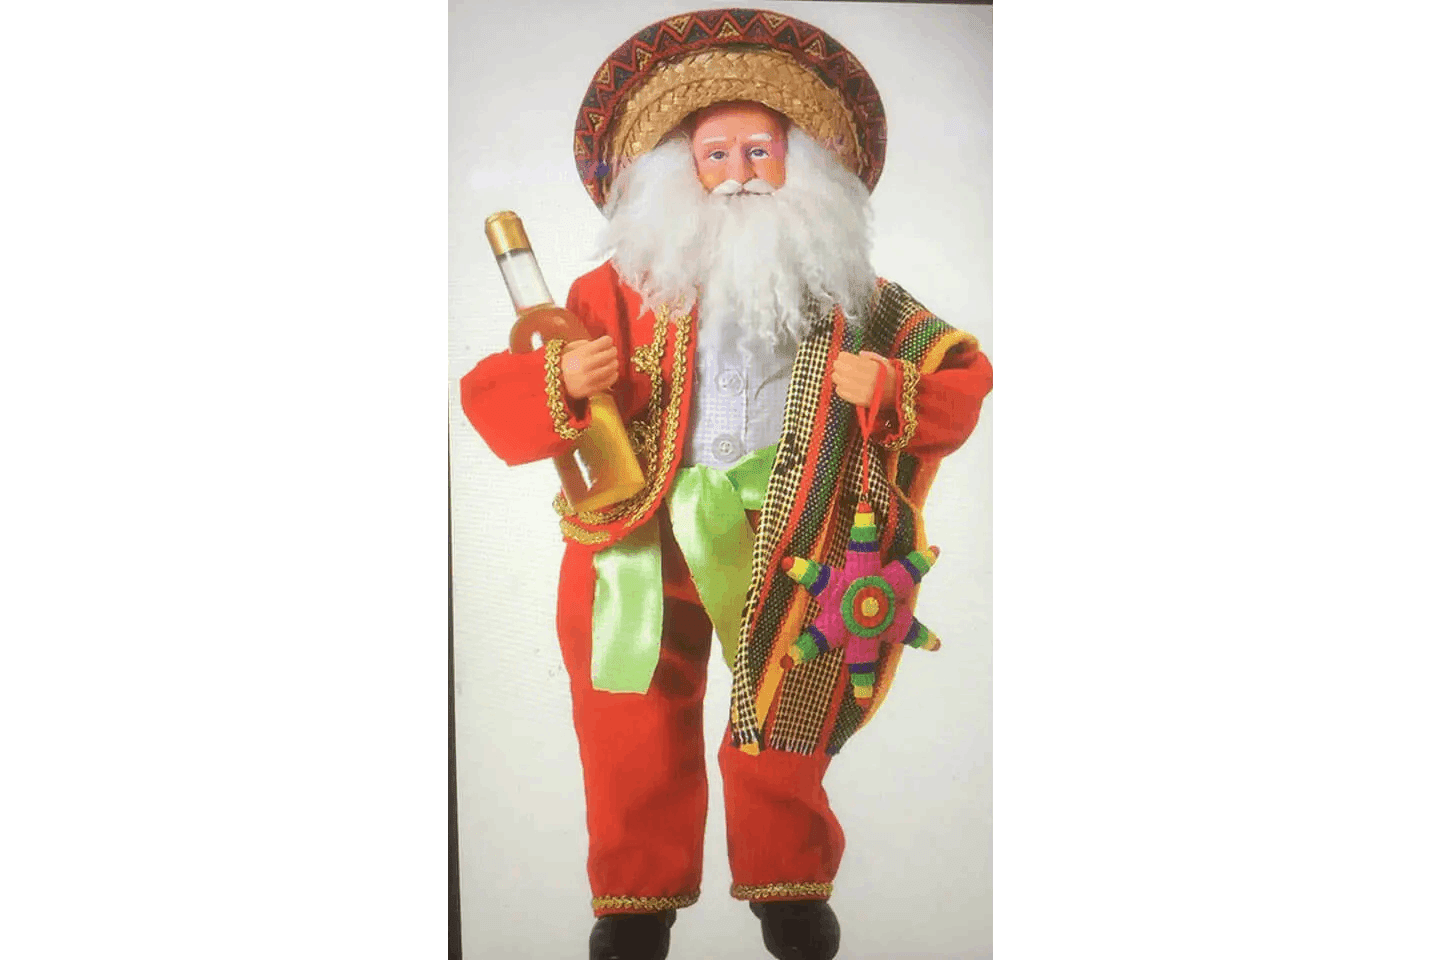 A santa clause doll with a hat and beard.